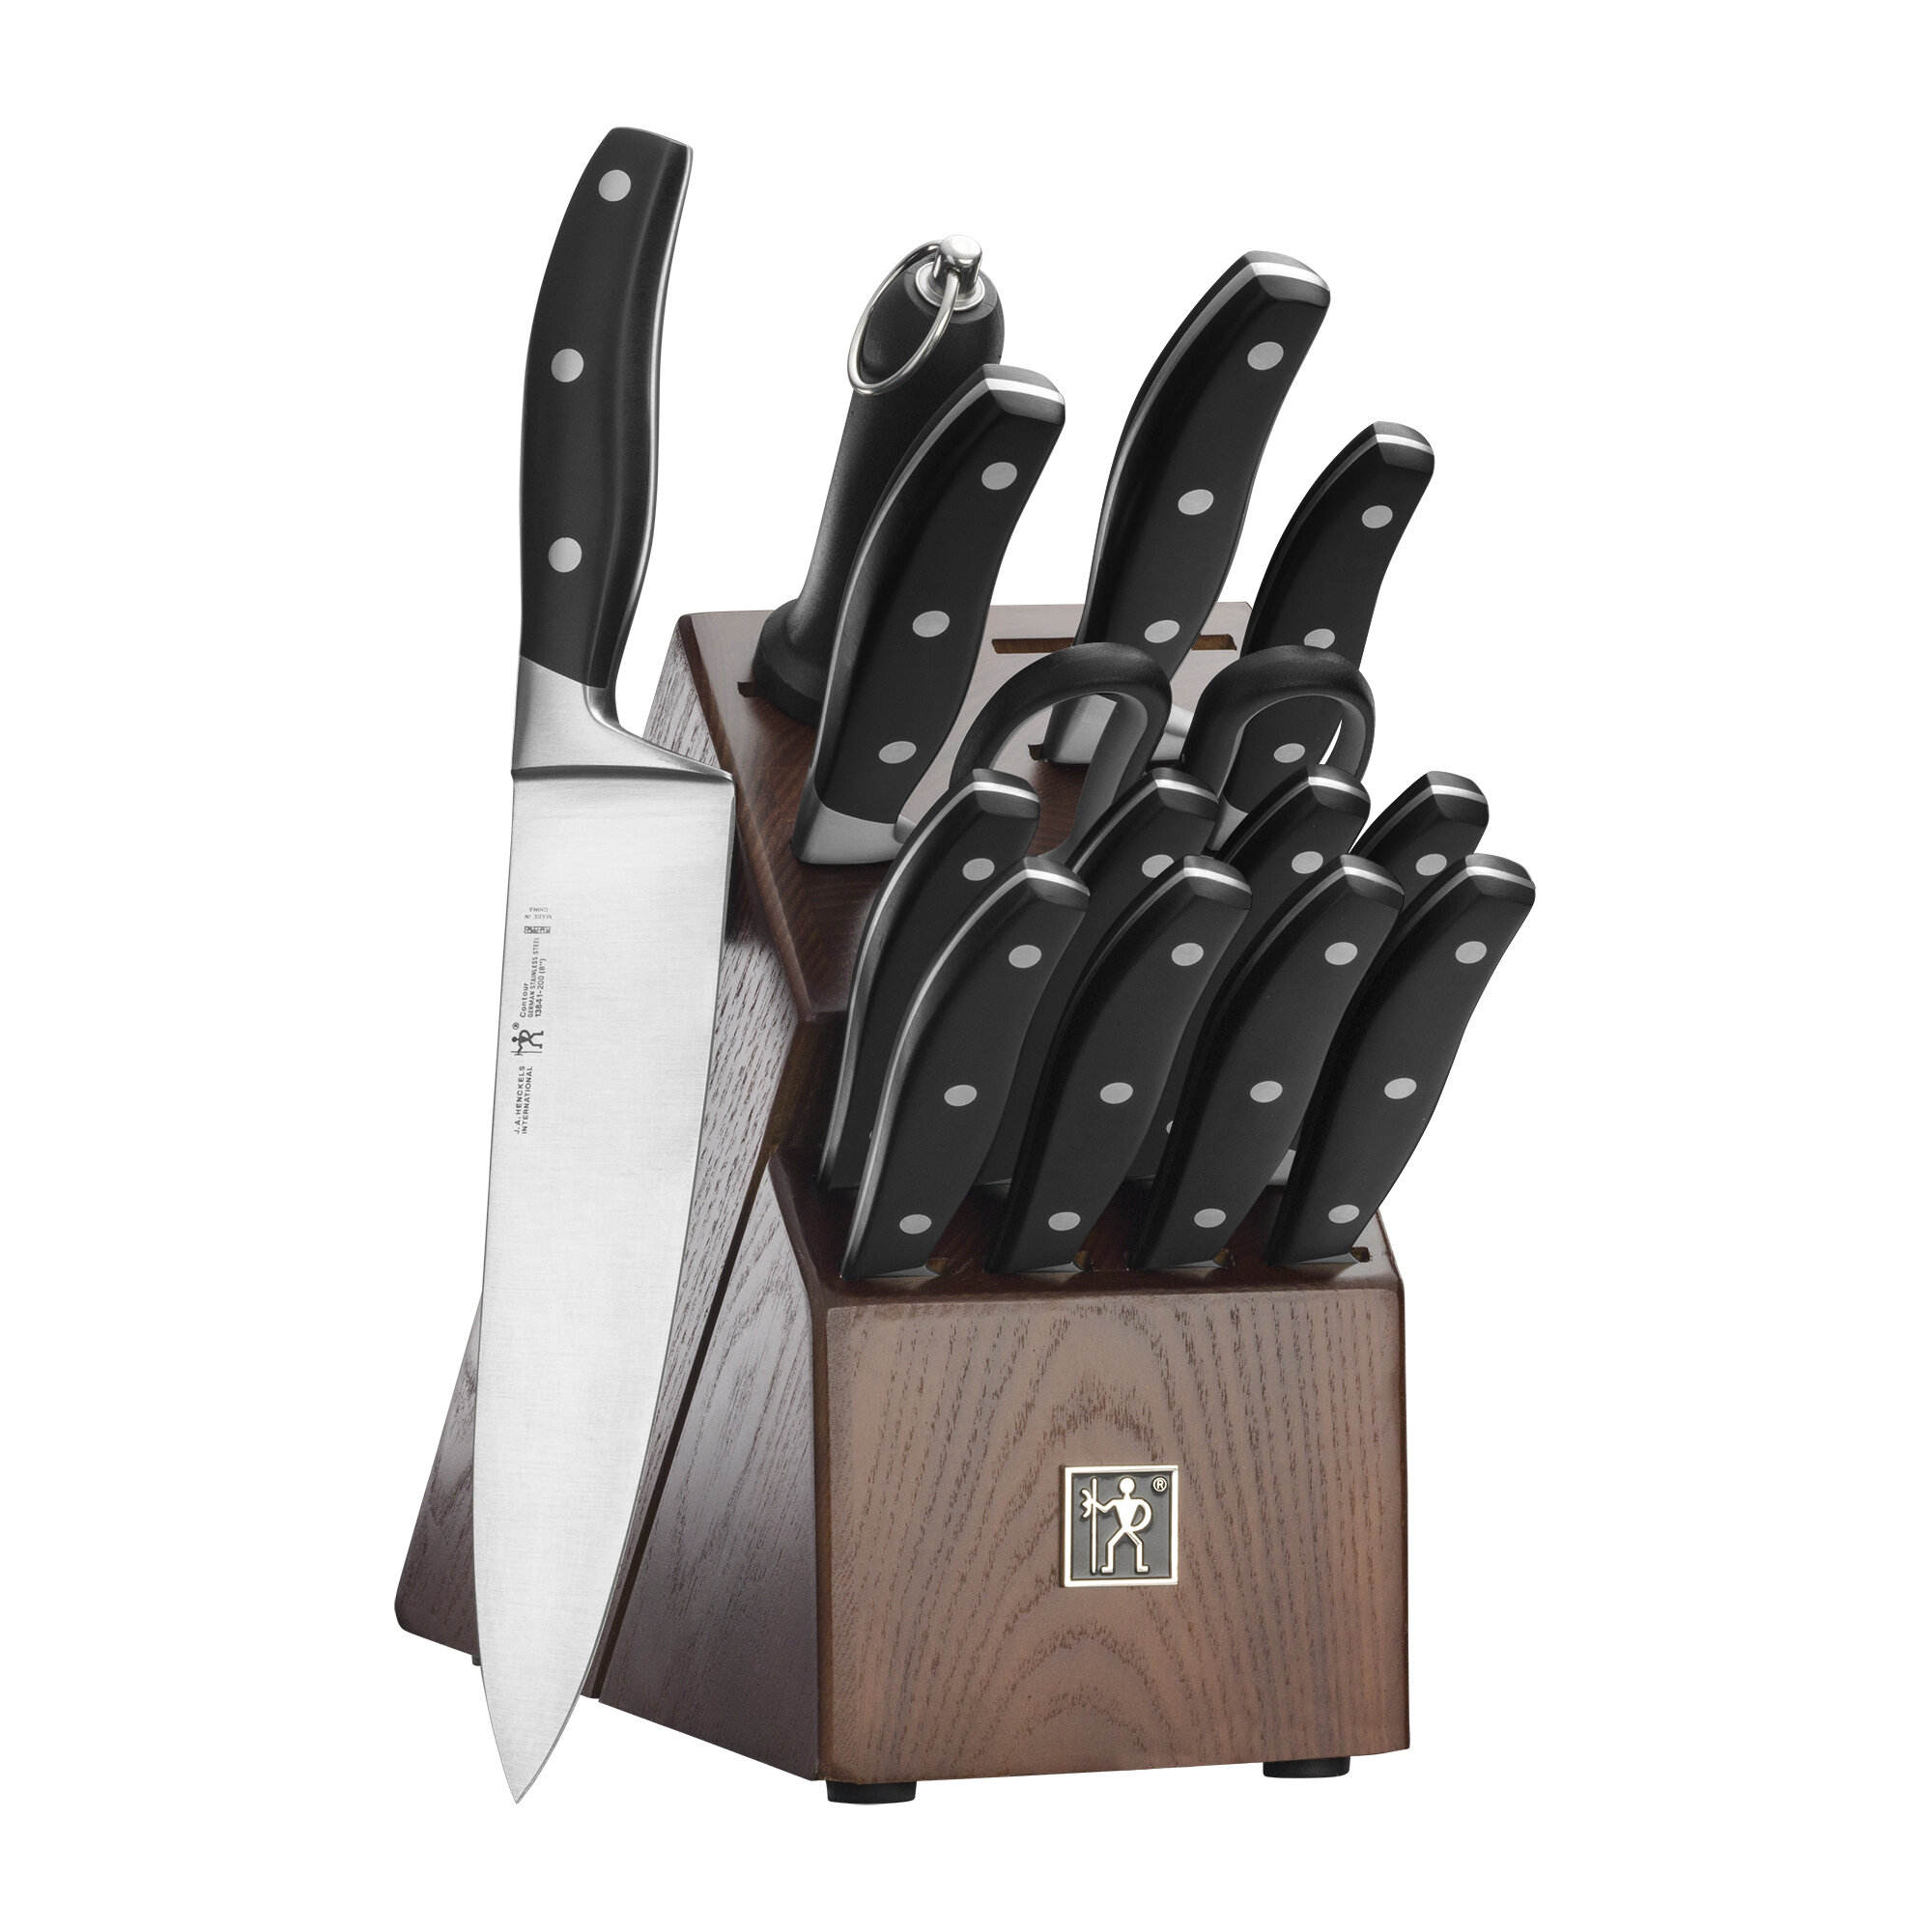 Henckels Forged Synergy 13-piece Knife Block Set & Reviews